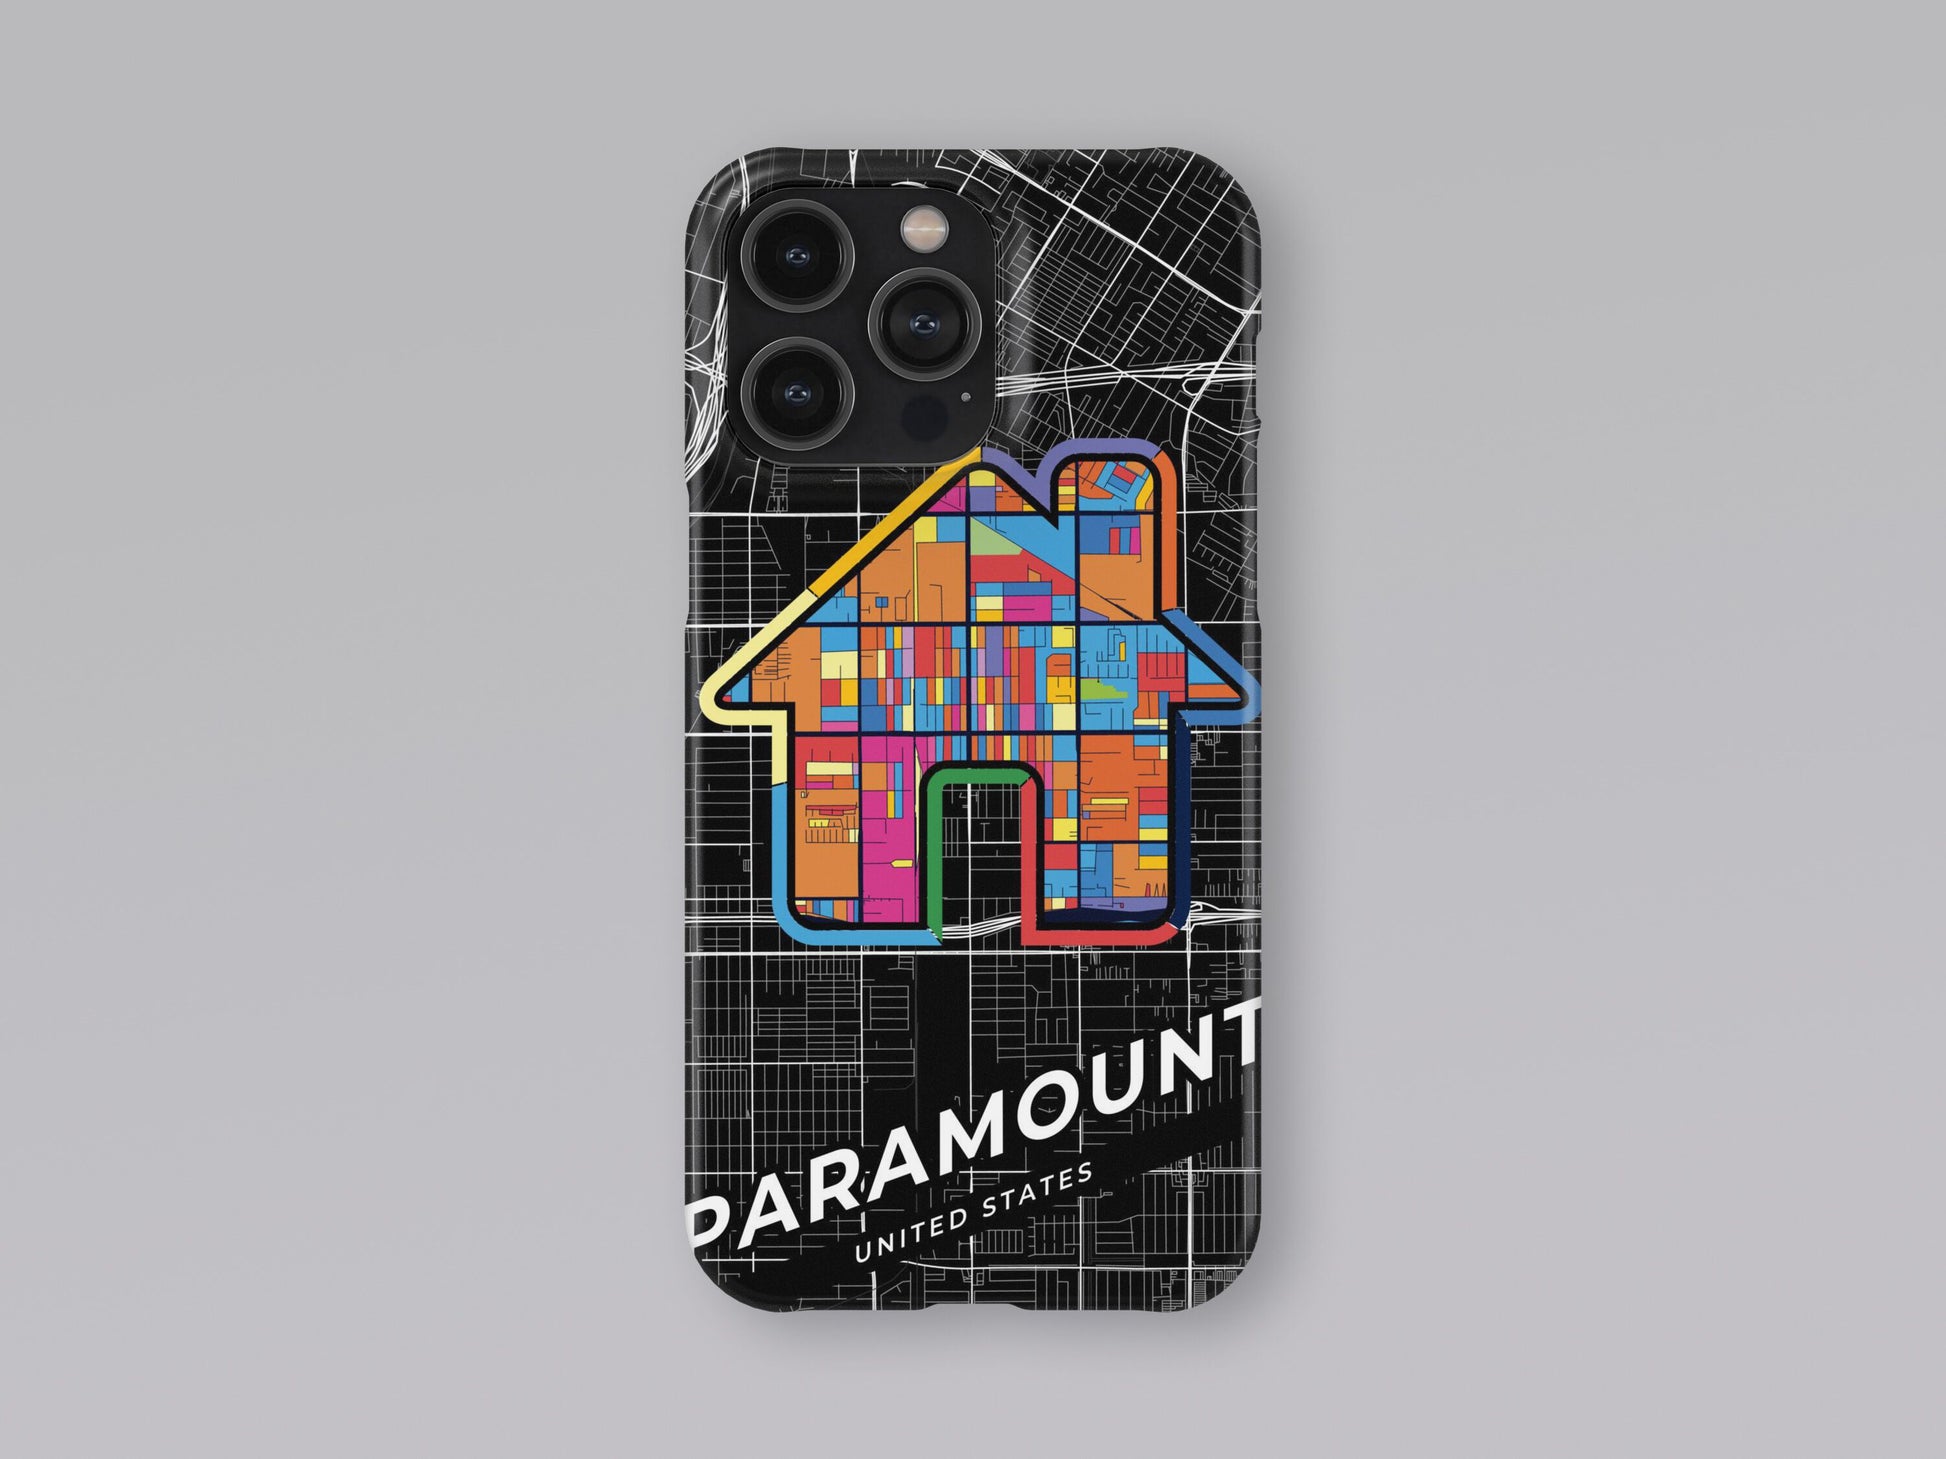 Paramount California slim phone case with colorful icon 3